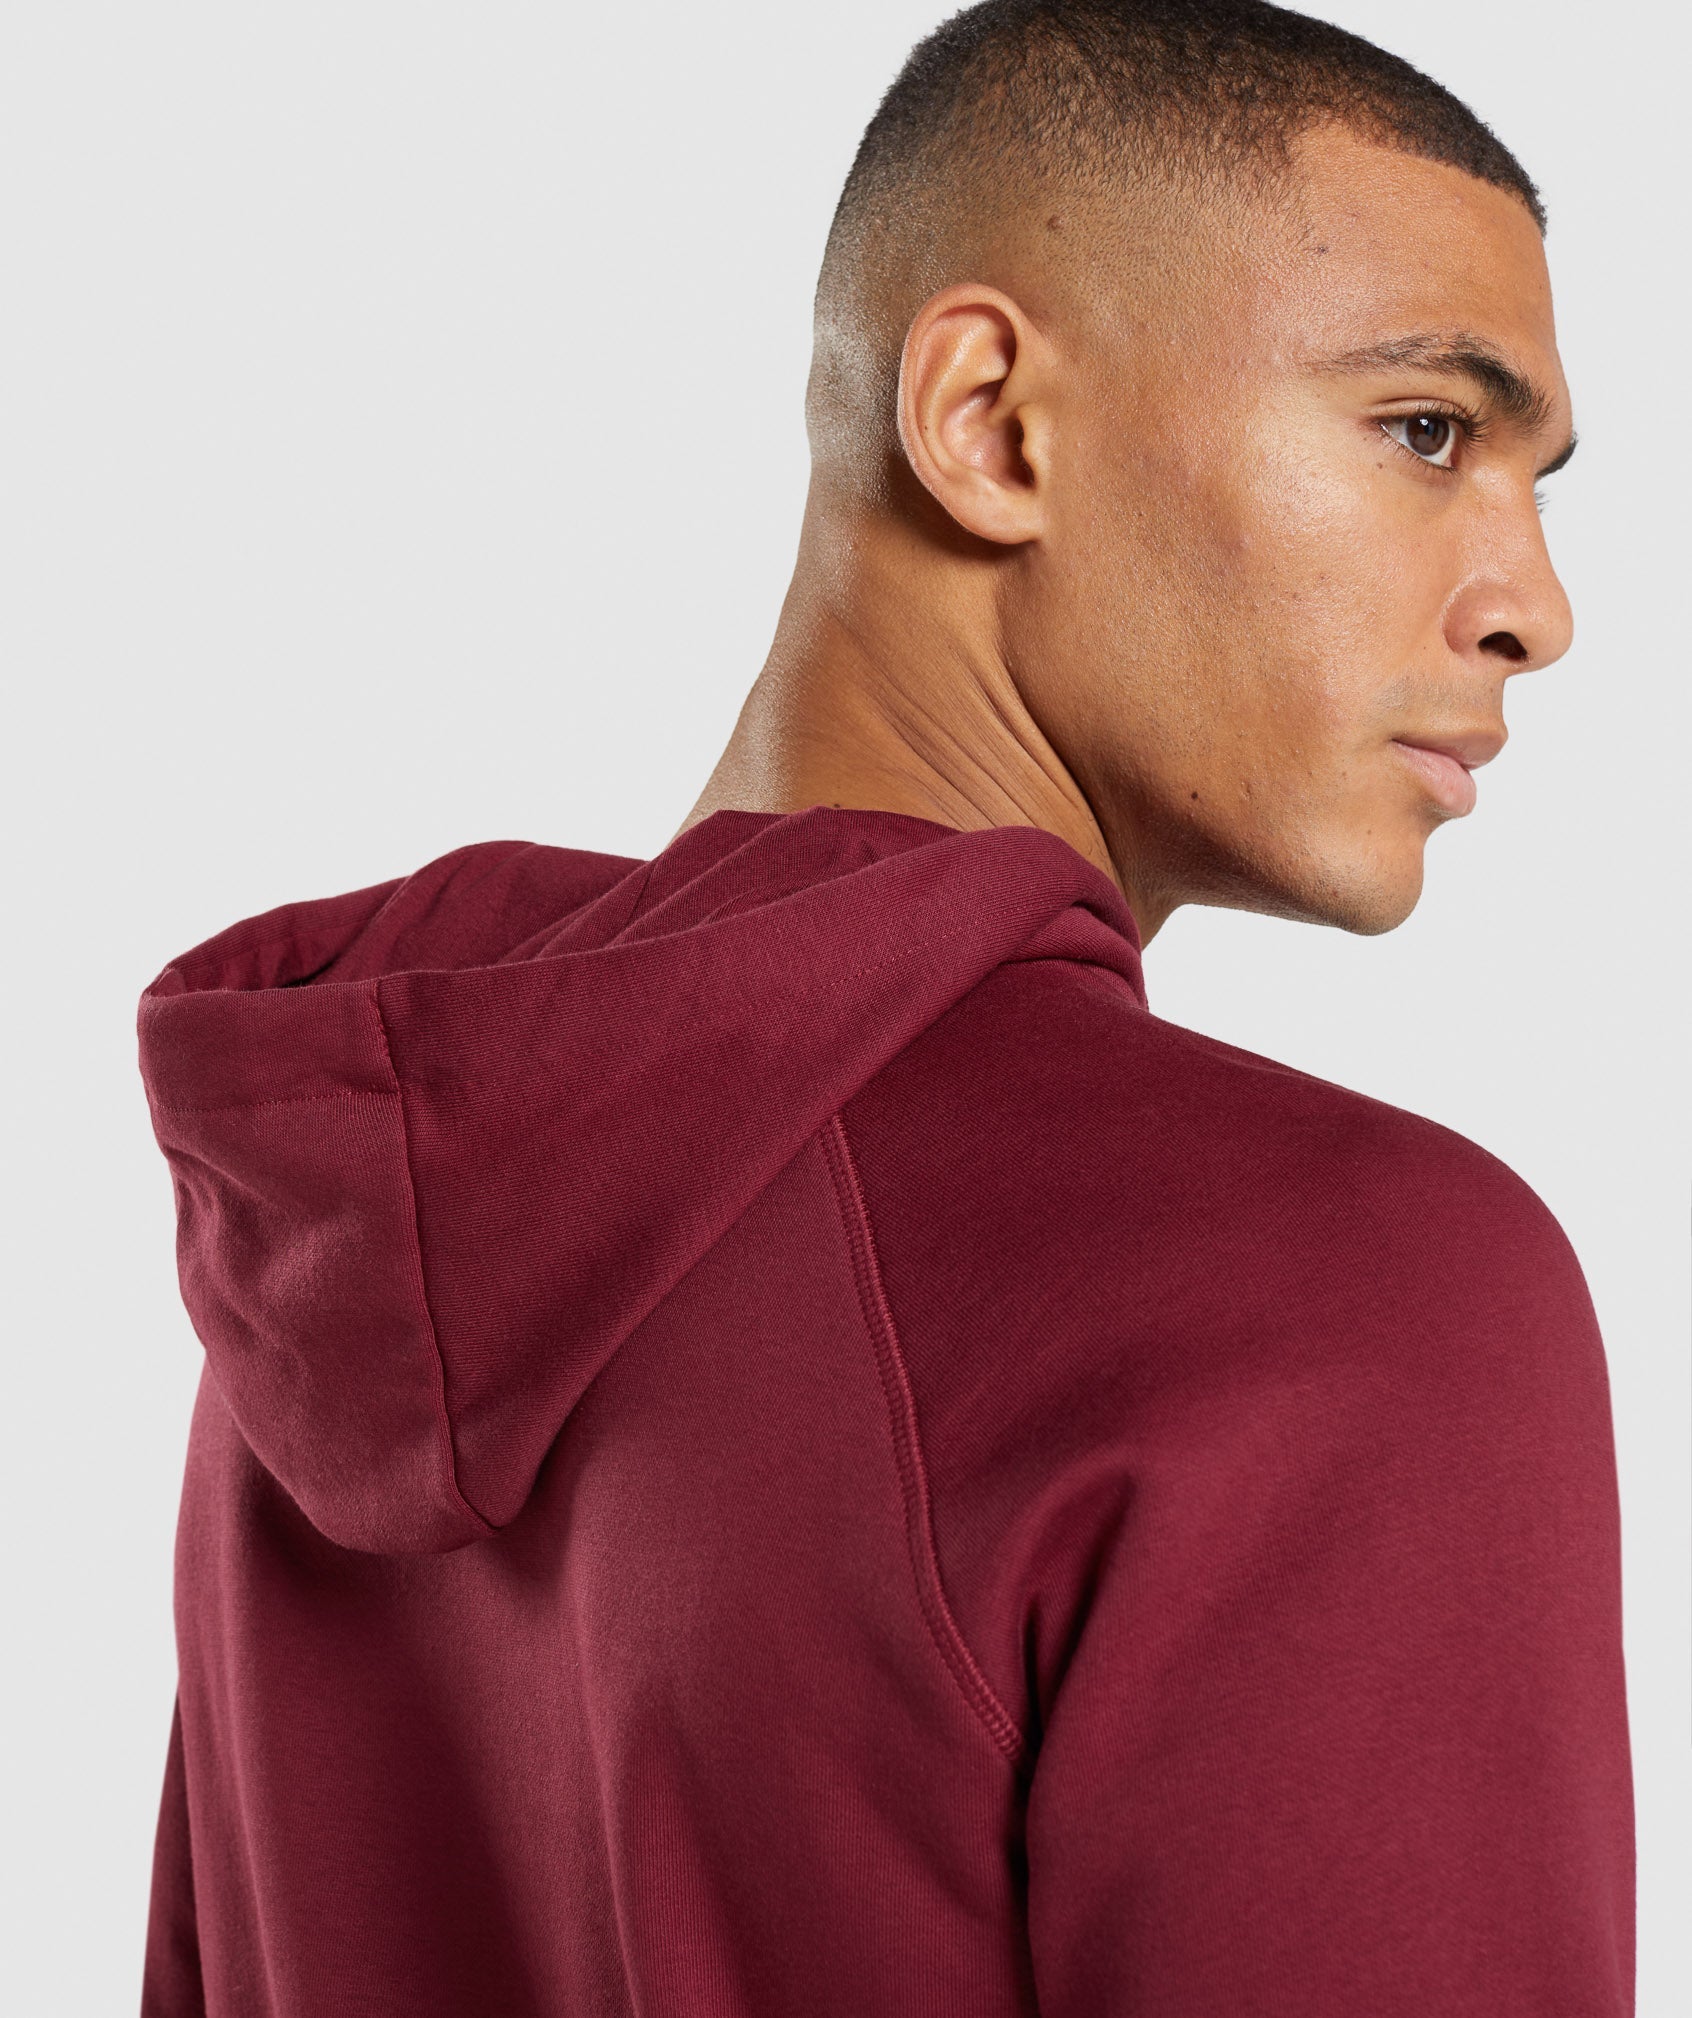 Crest Hoodie in Burgundy Red - view 6